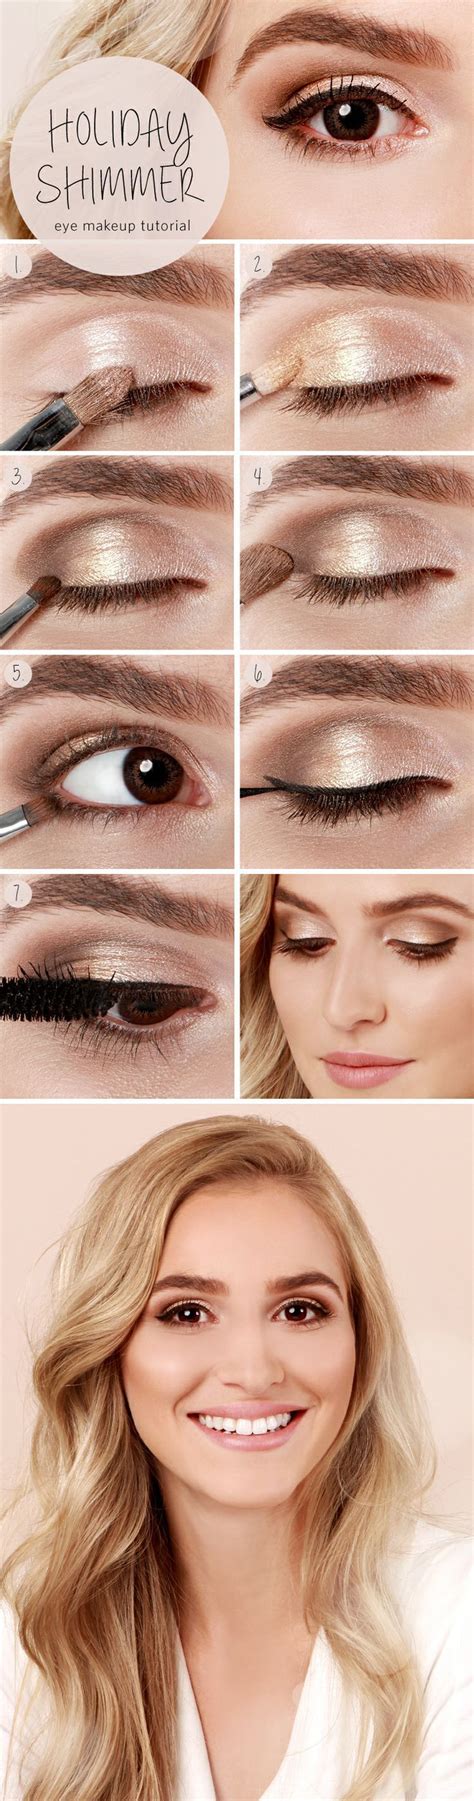 10 Amazing Eye Makeup Tutorials To Turn You Into A Beauty WHIZZ Make